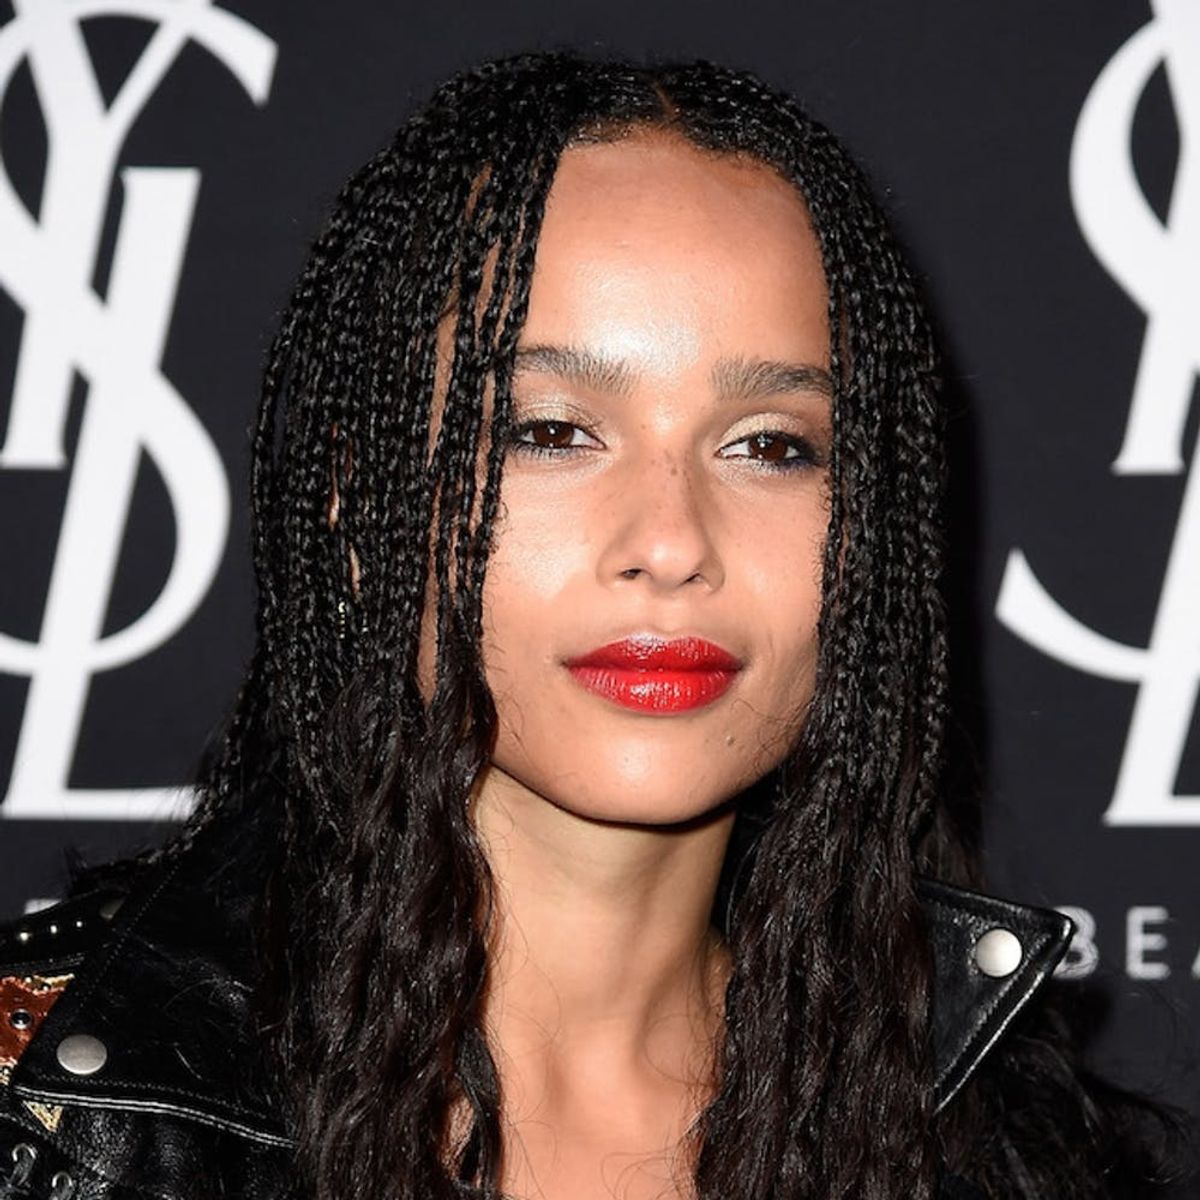 Zoe Kravitz Shows How to Get More Life Out of Your Summer Tops and Dresses